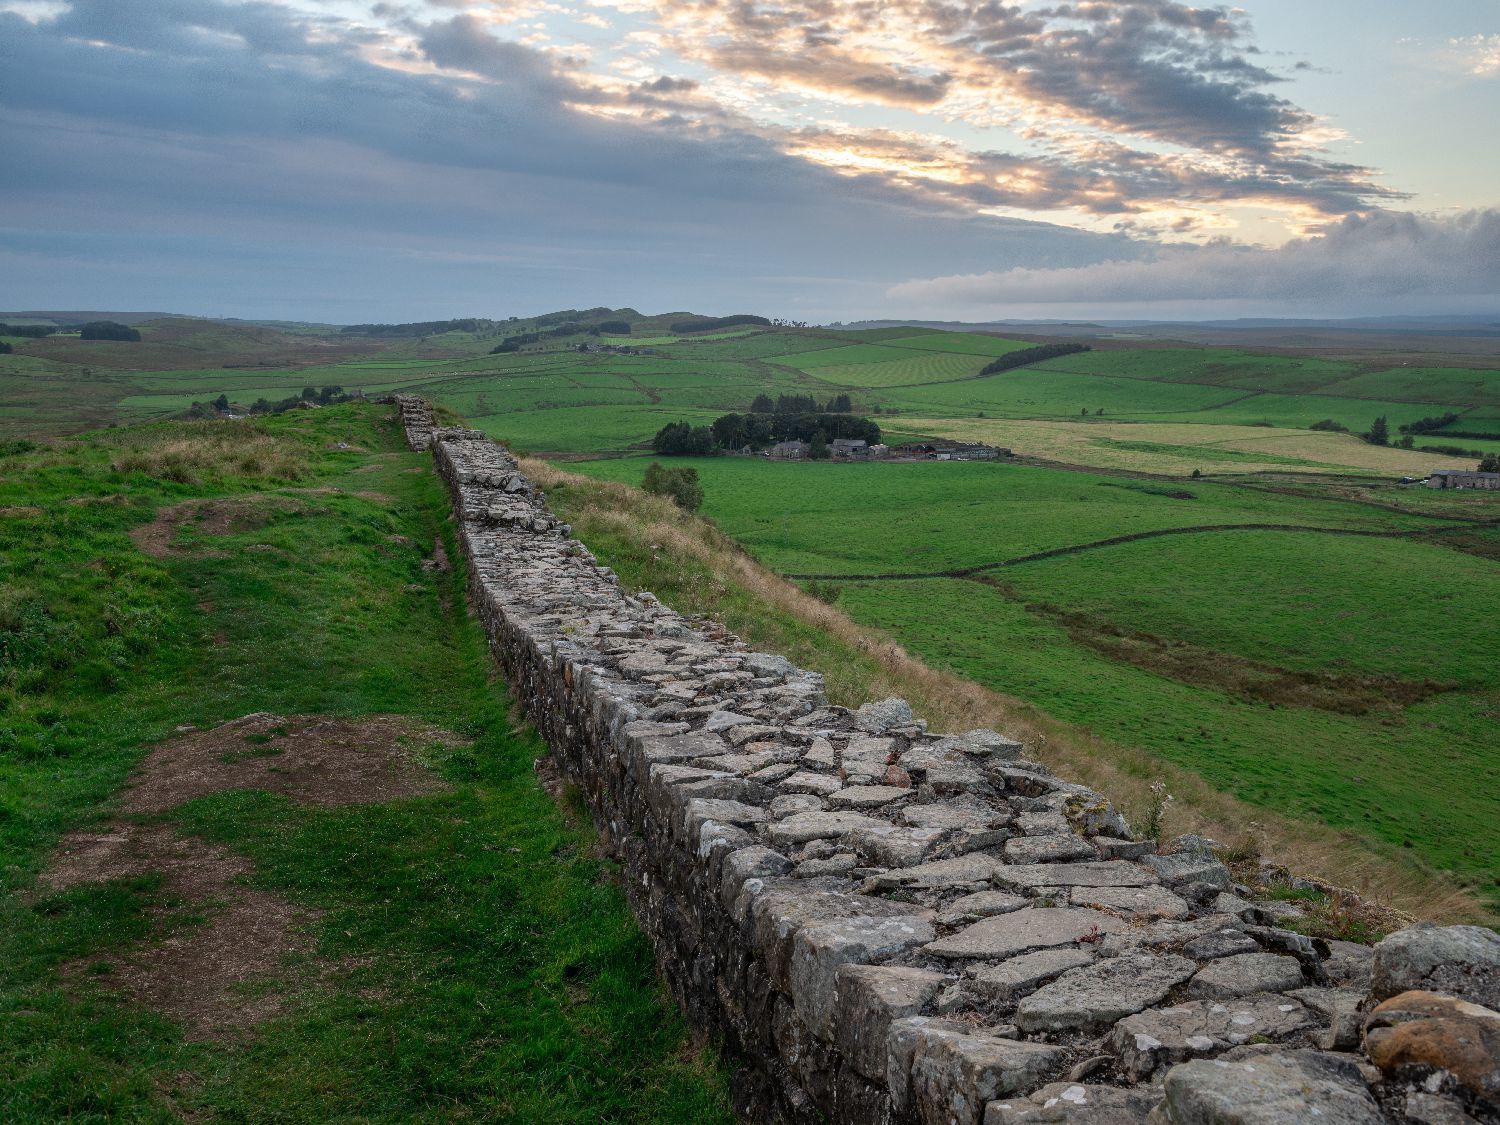 Hadrian's Wall～From the United Kingdom